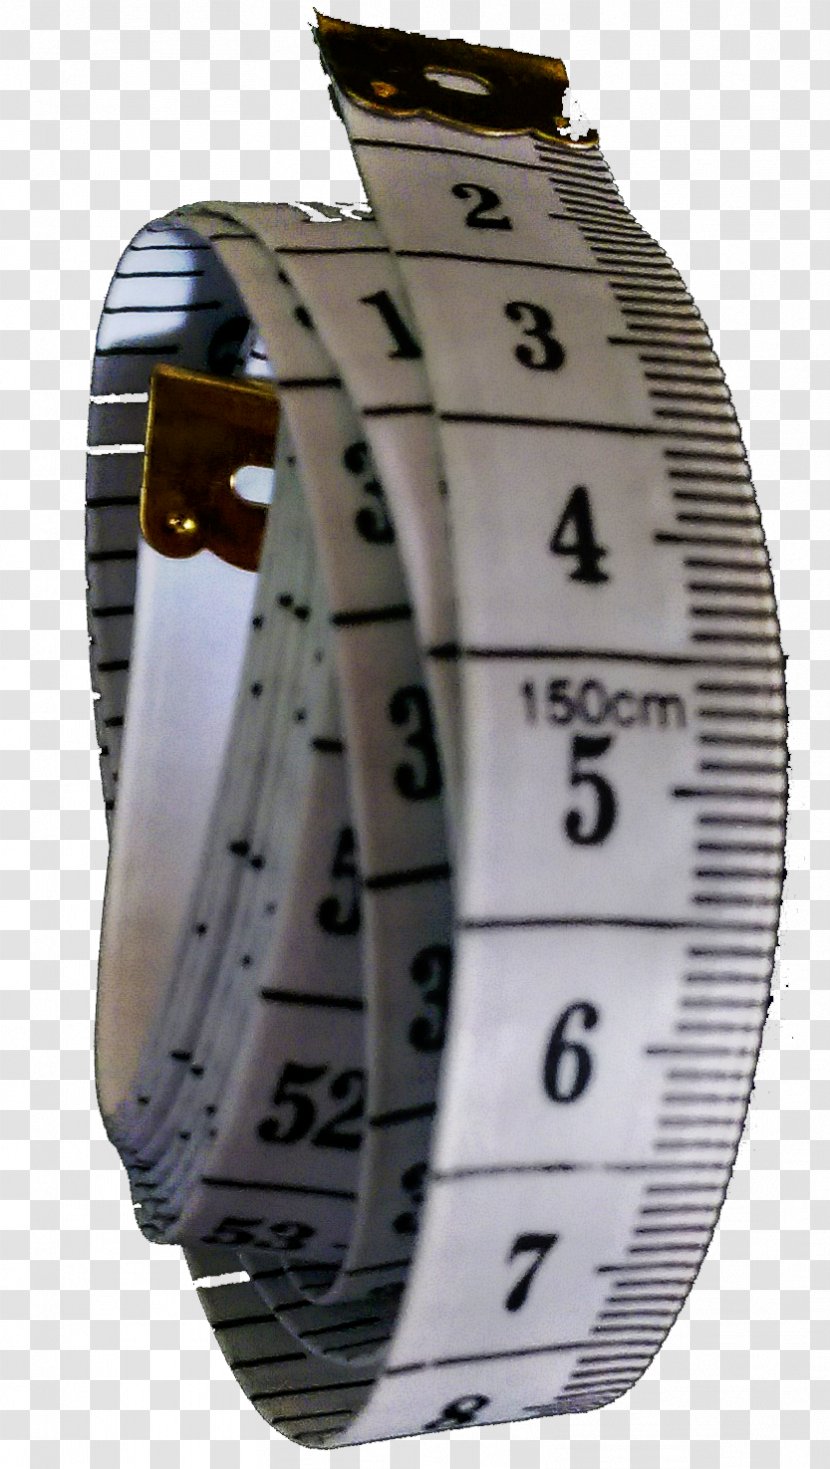 Watch Strap Metal - Accessory - Tape Measure Transparent PNG